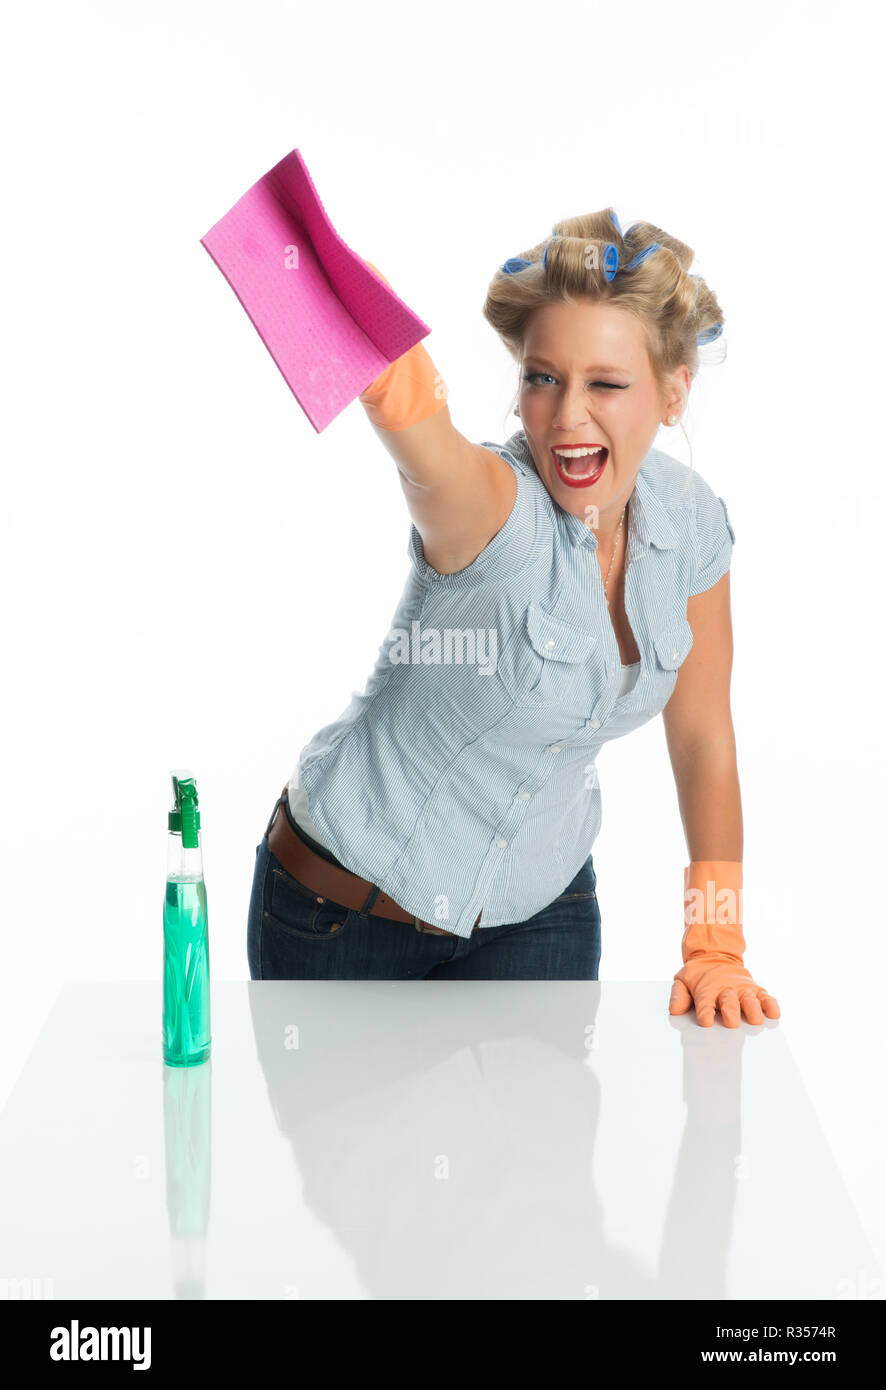 housewife with spray bottle Stock Photo